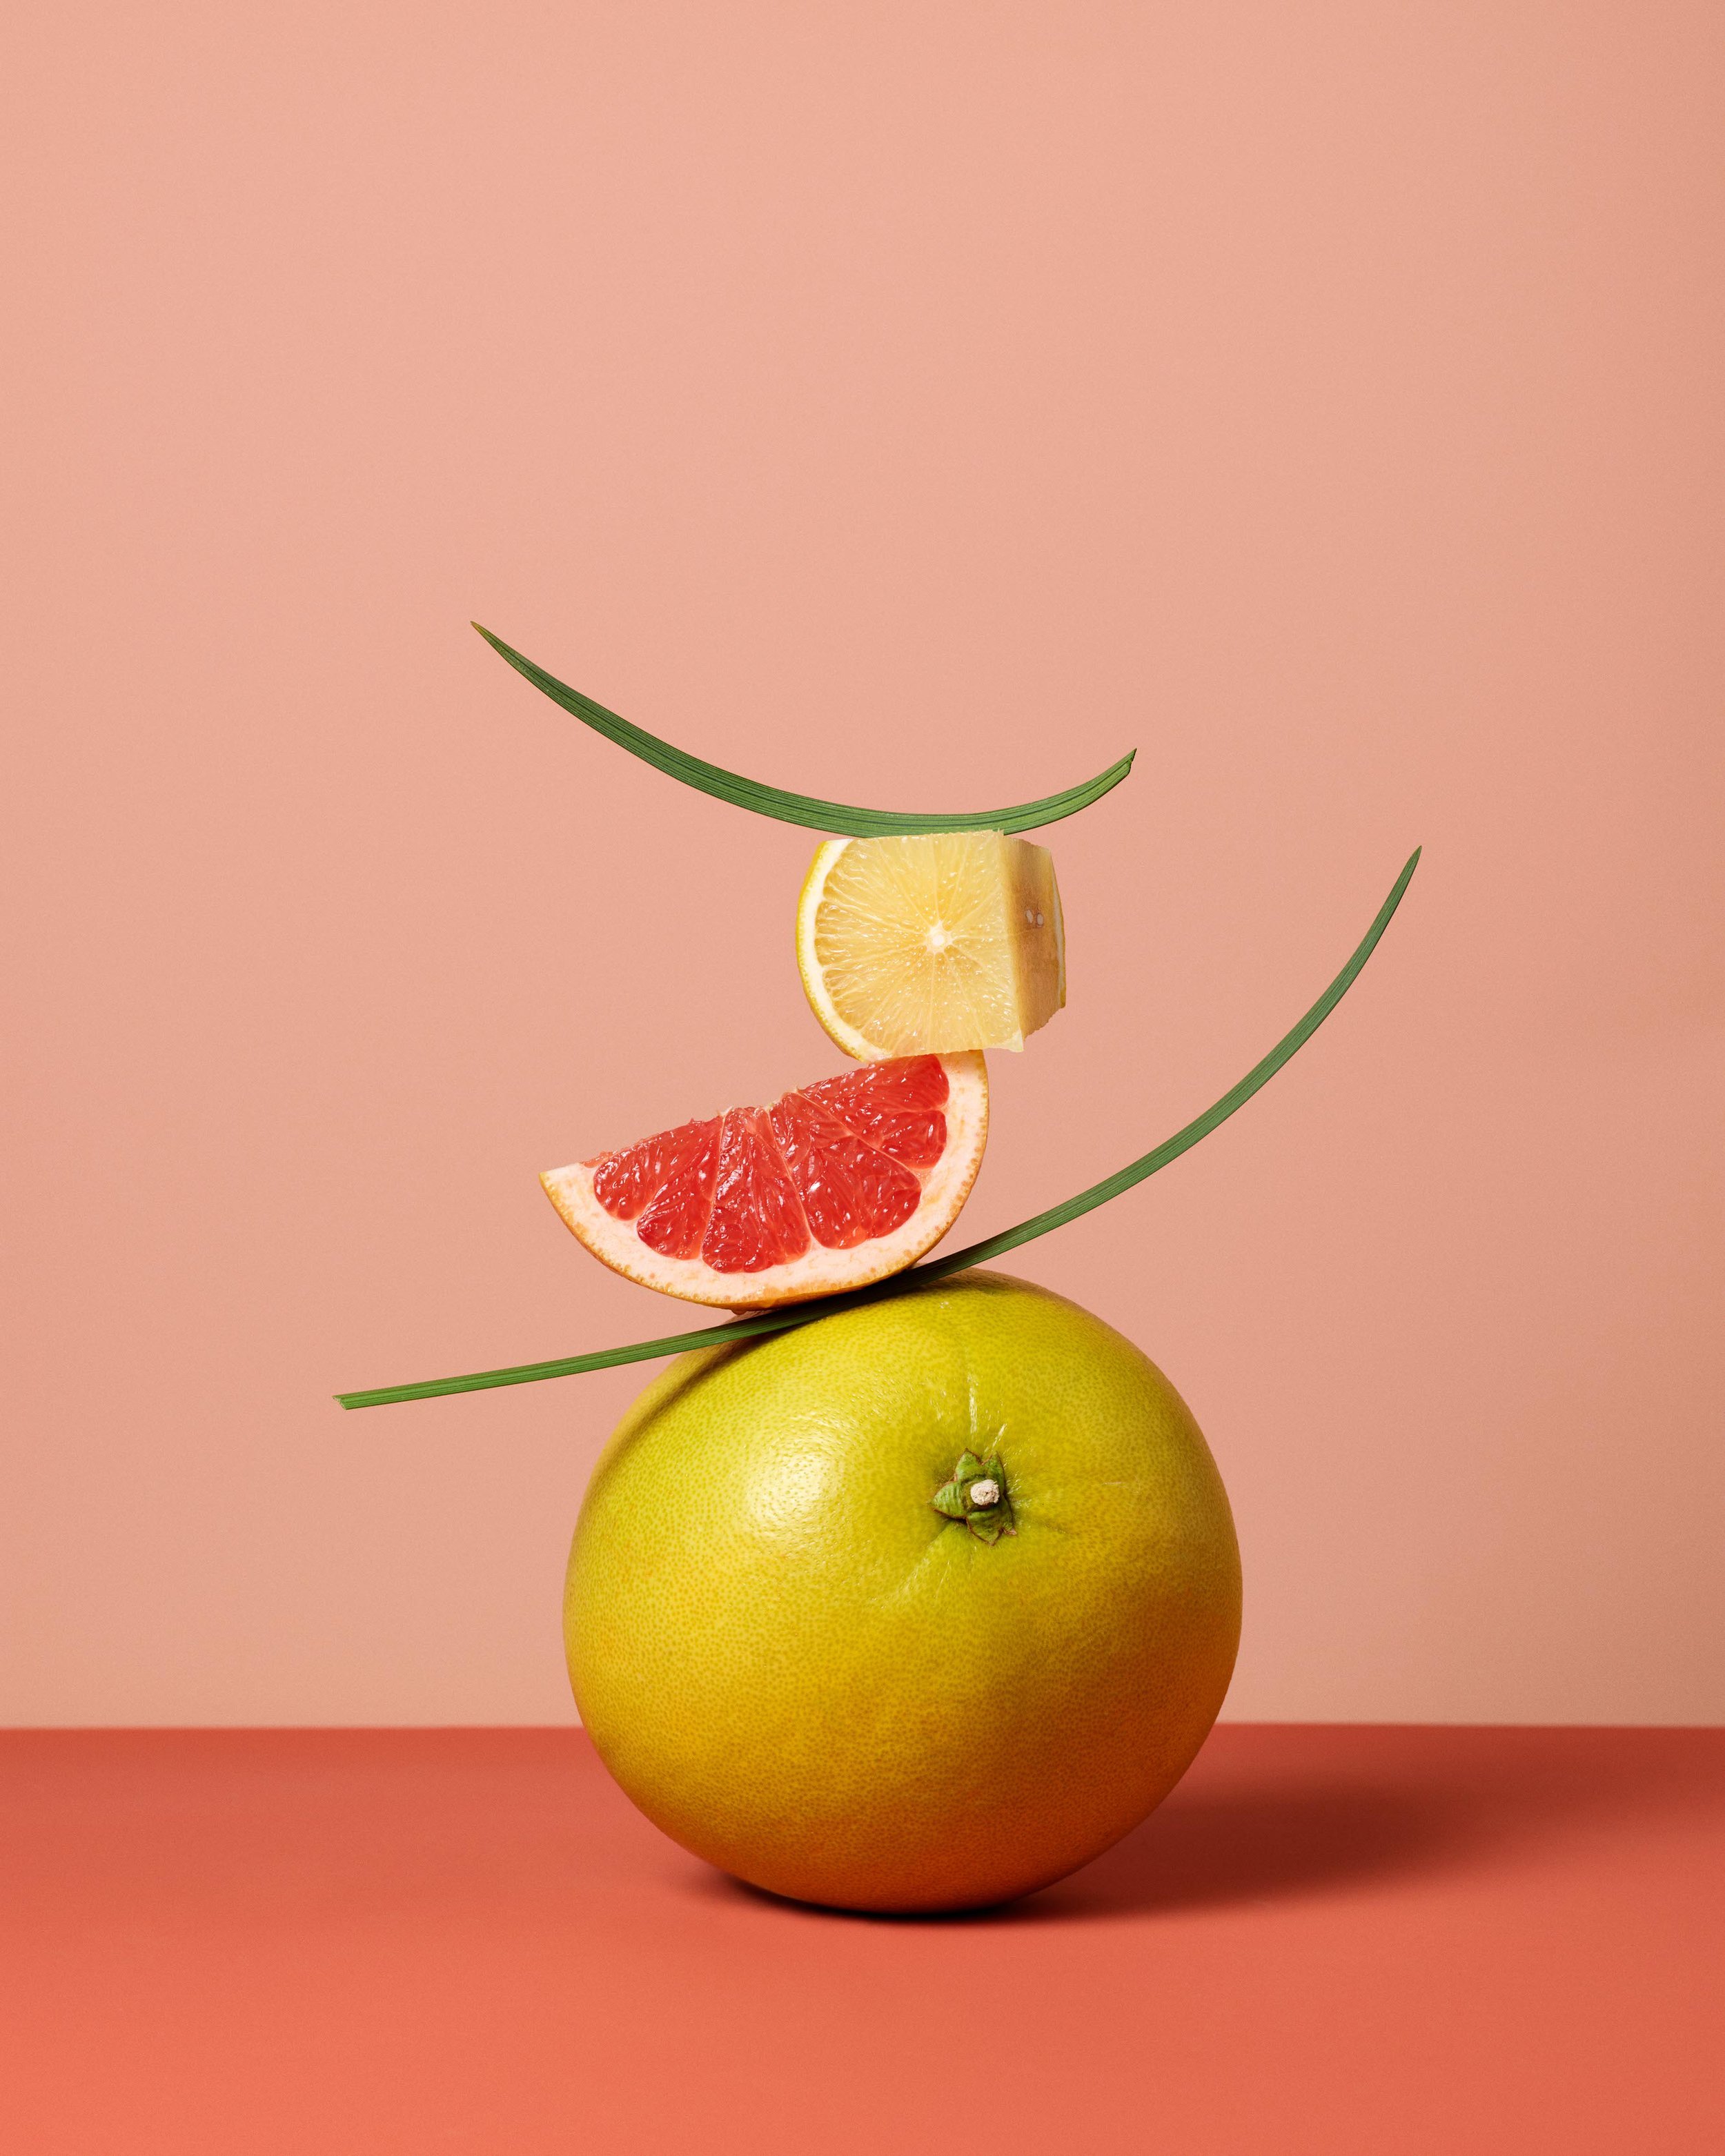 Product + Still life — dimitri newman photography